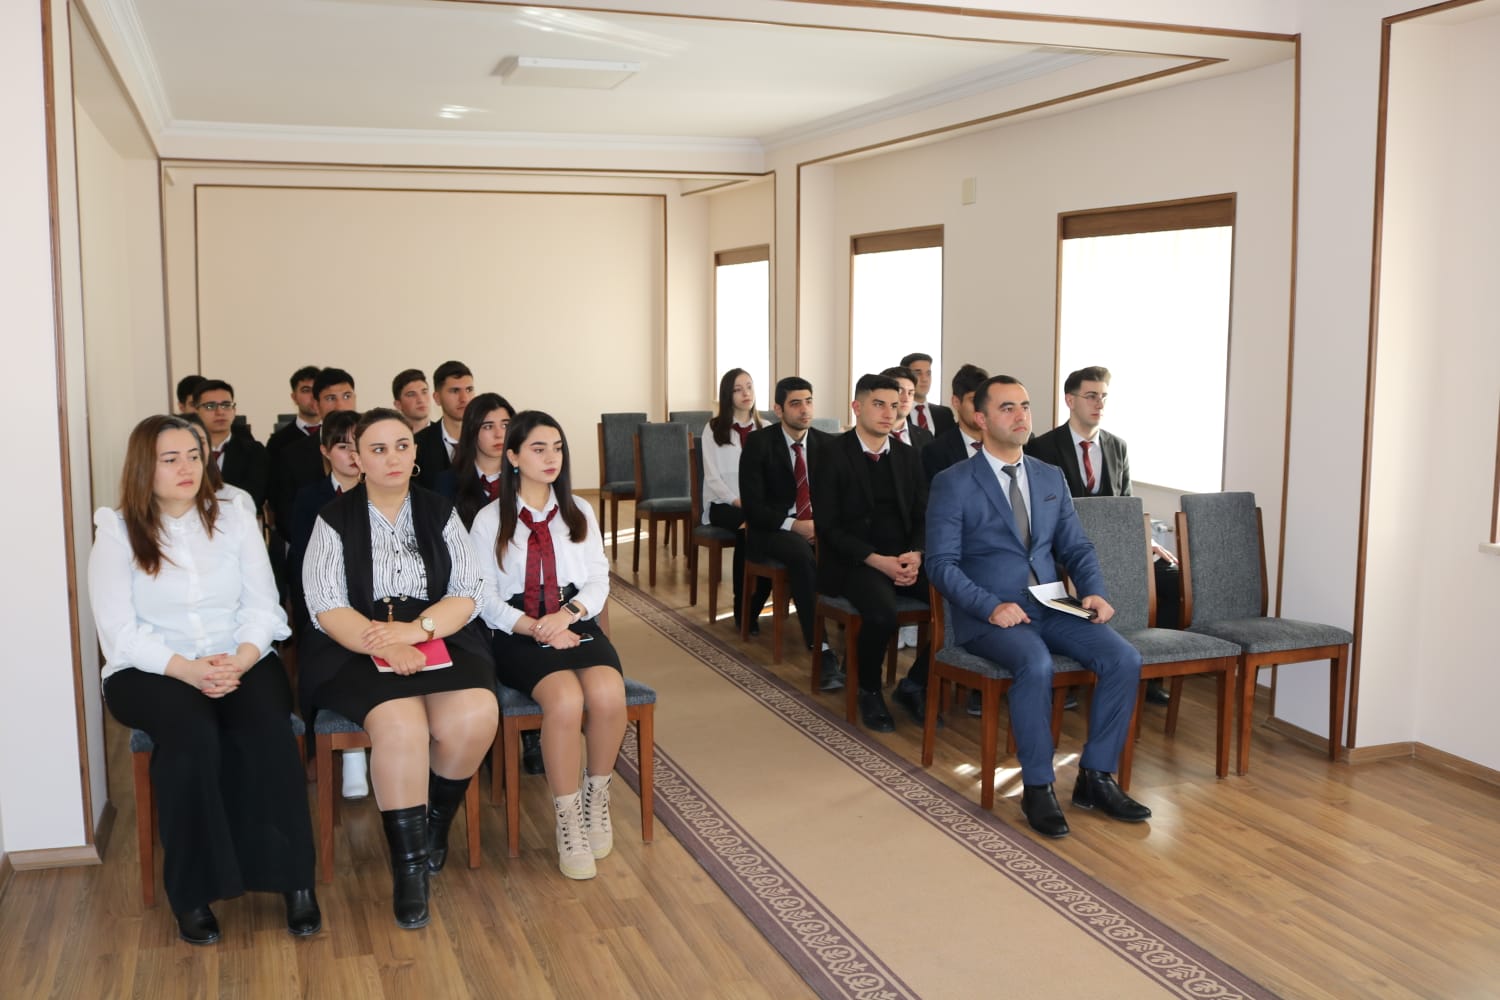 Meeting was held with students at the Tourism Department of Nakhchivan Autonomous Republic.